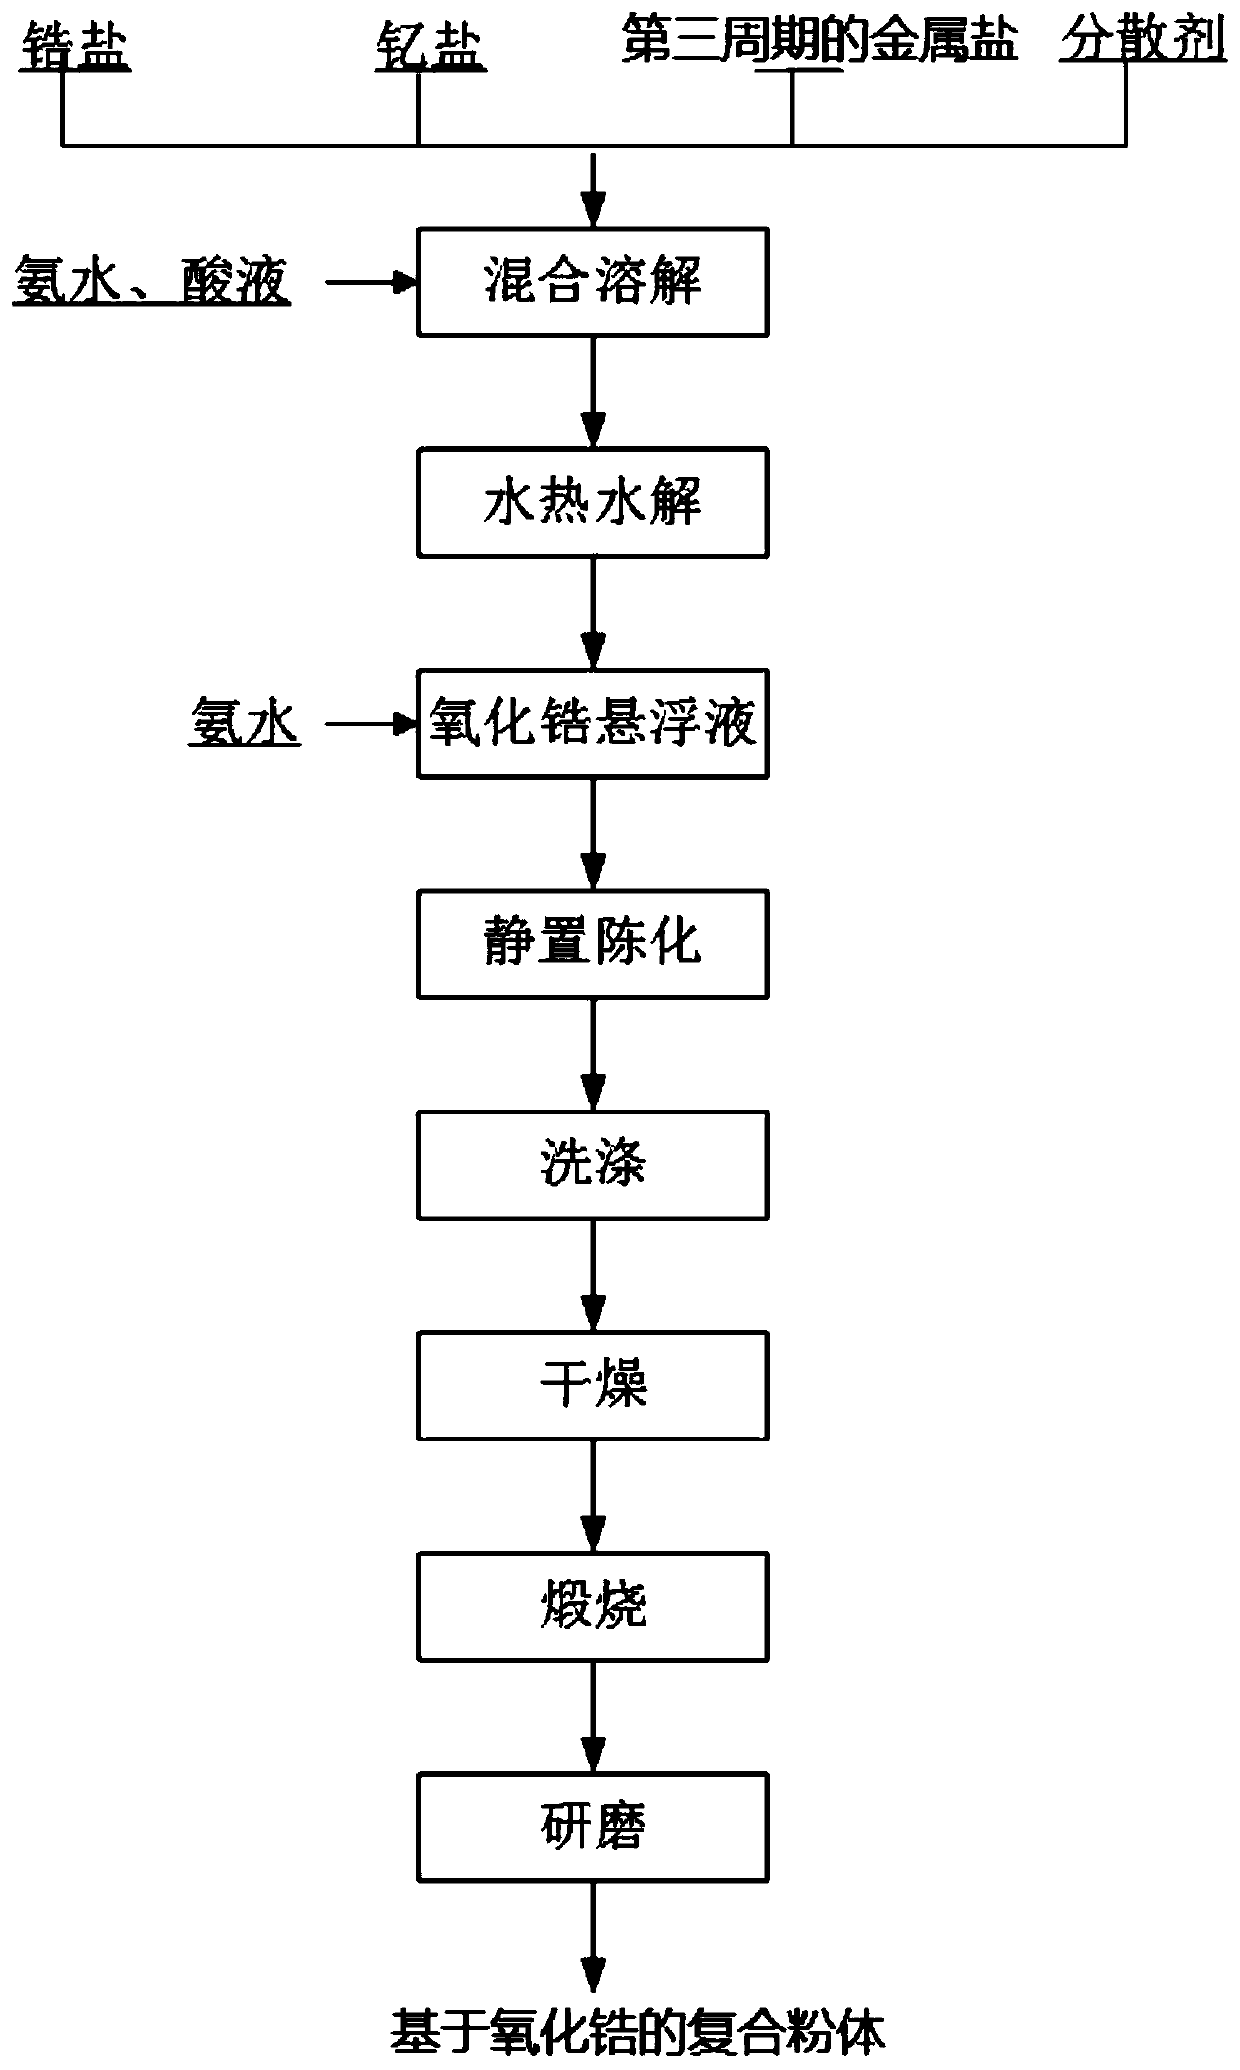 High-toughness zirconia-based composite powder and preparation method thereof